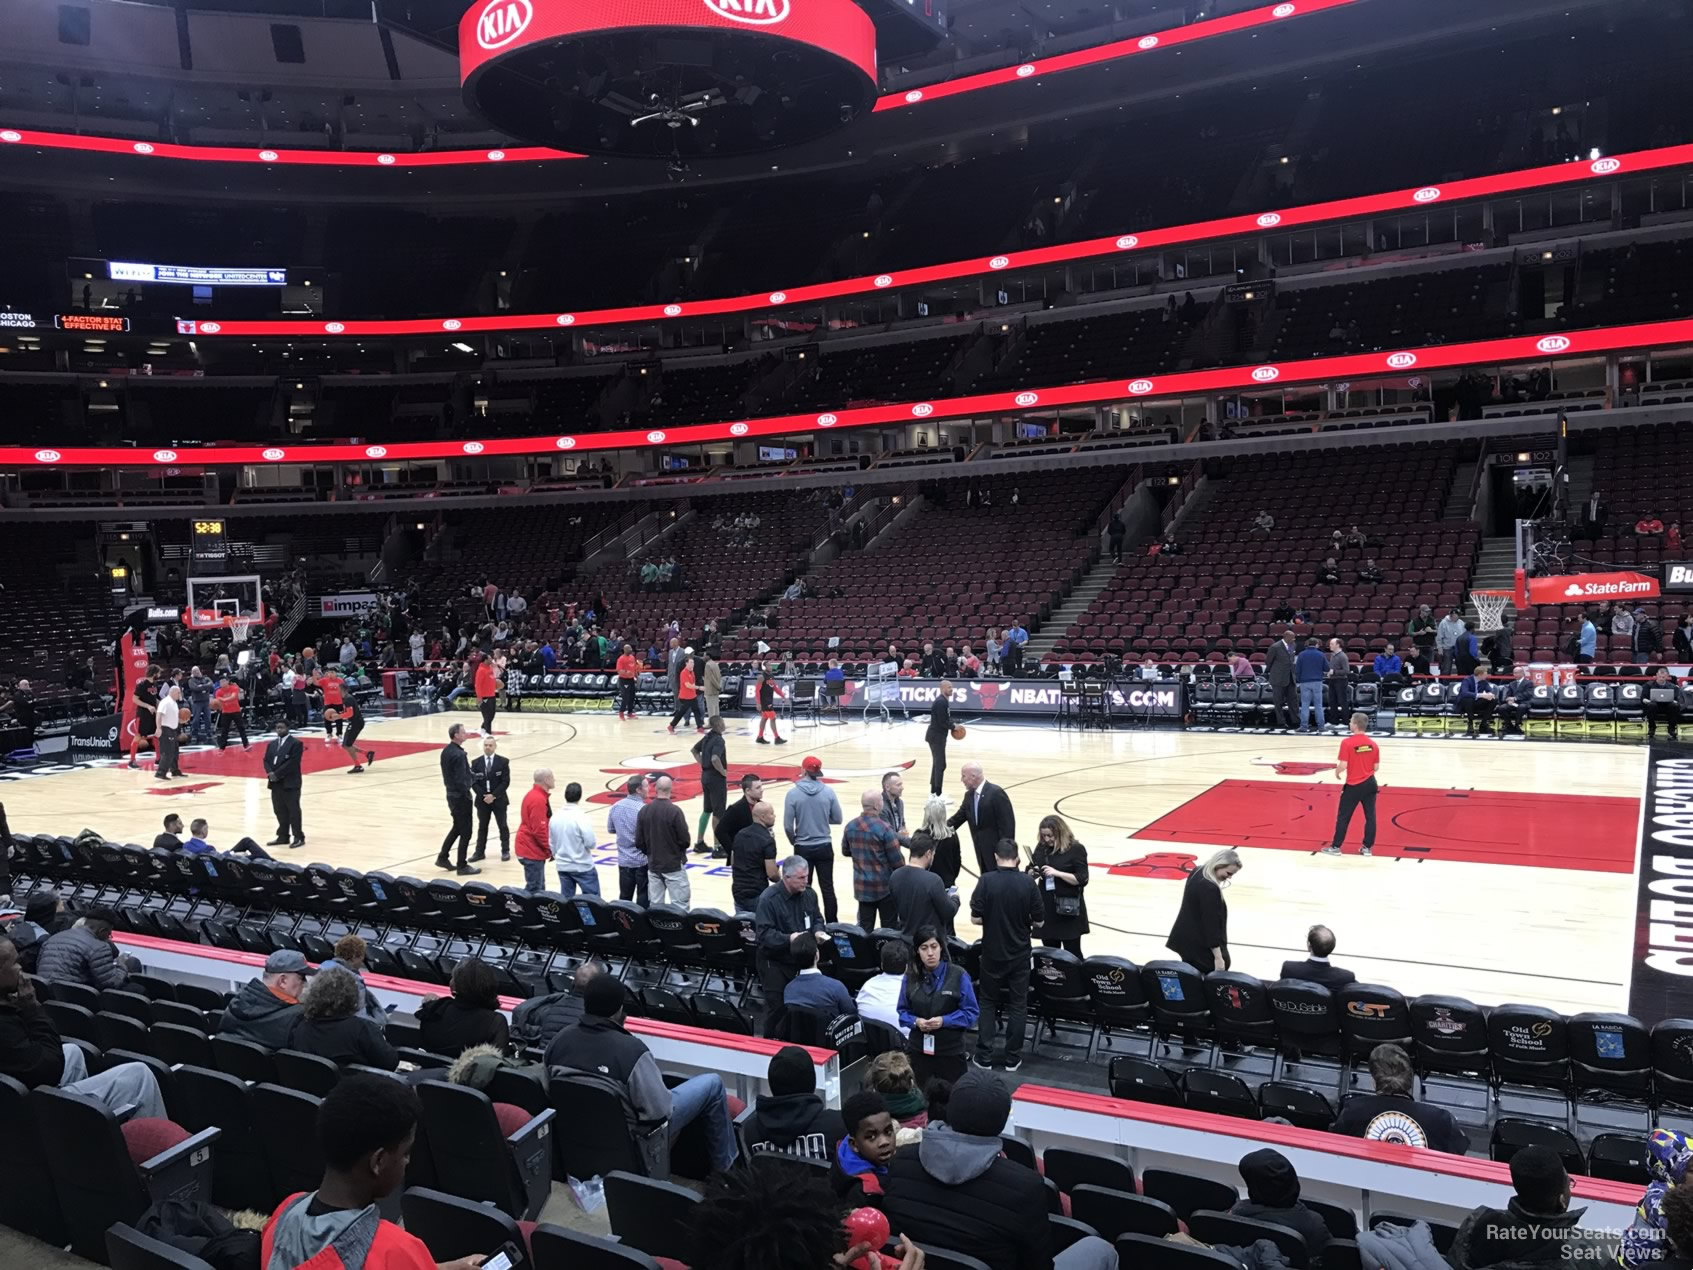 Section 110 at United Center - Chicago Bulls - RateYourSeats.com